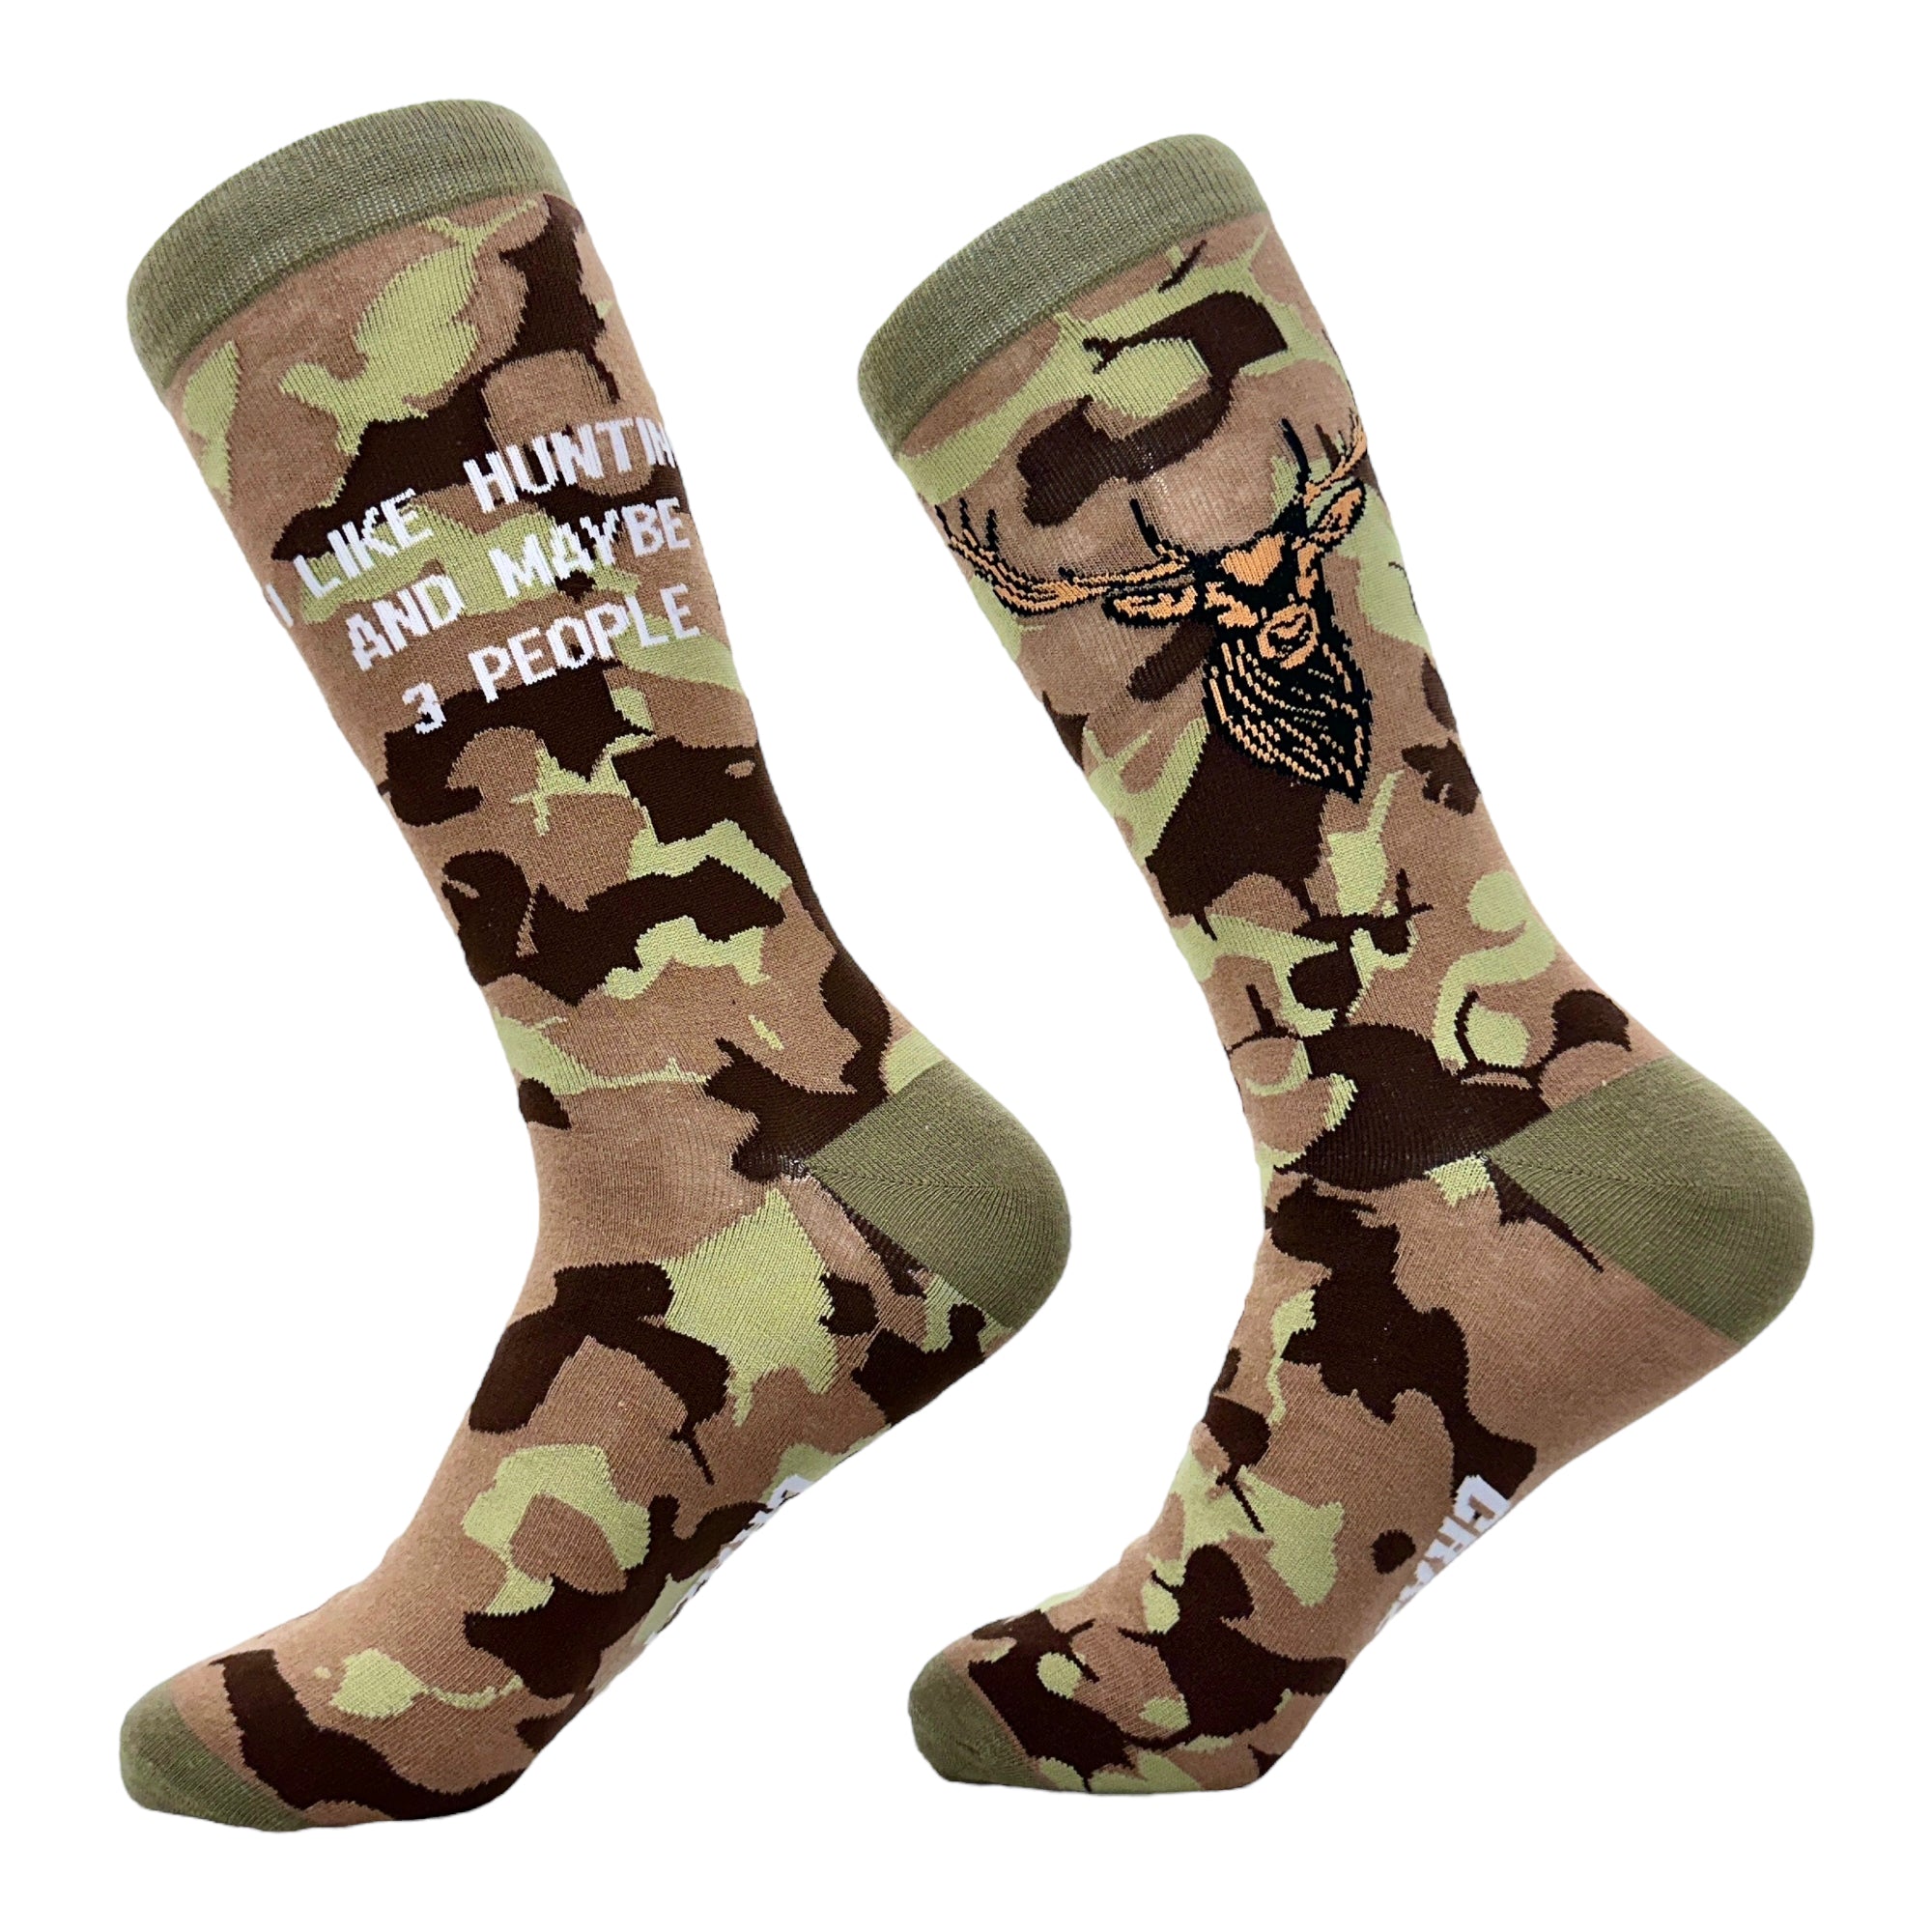 Funny Multi - Hunting Men's I Like Hunting And Maybe 3 People Sock Nerdy Hunting Introvert Tee